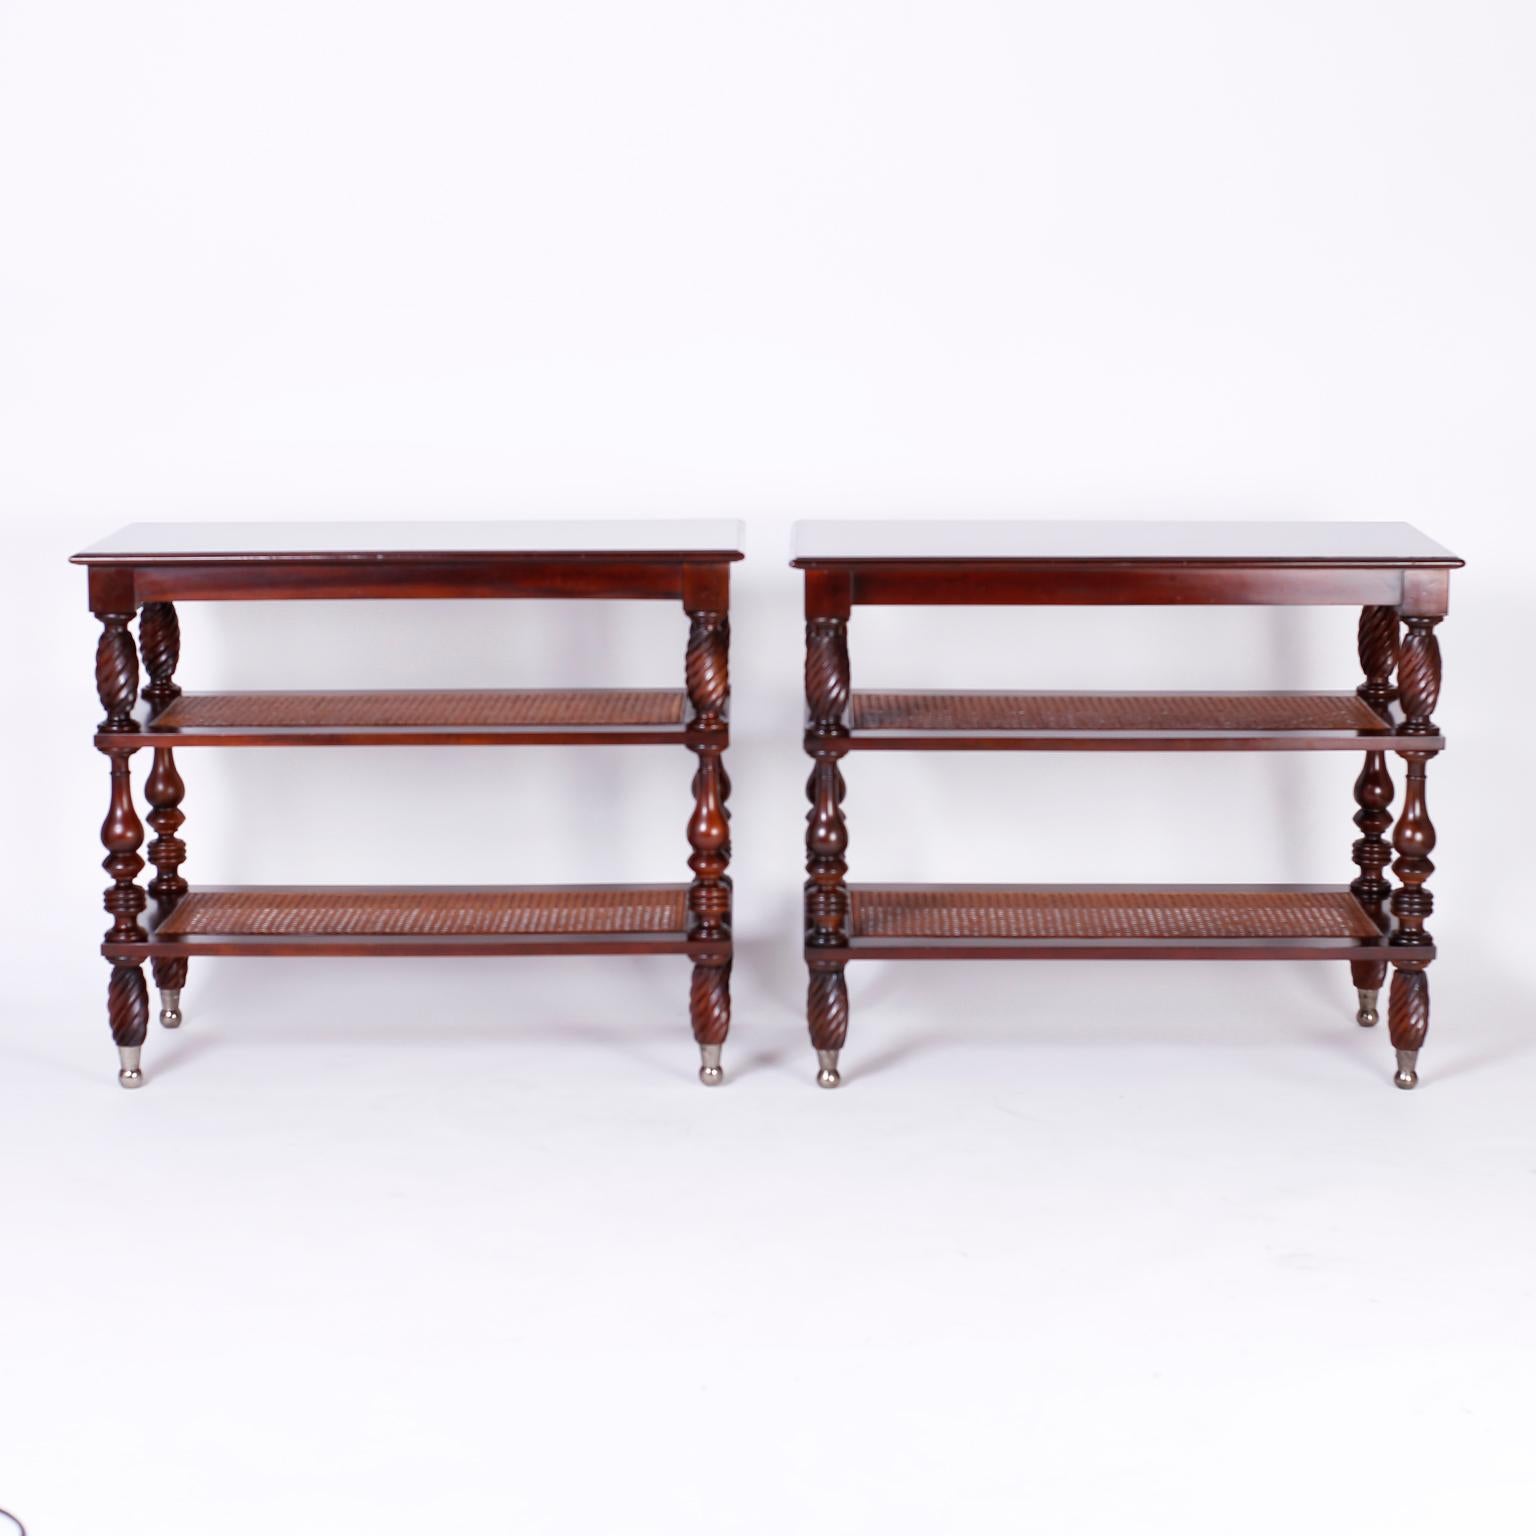 Pair of British colonial stands crafted in mahogany with three tiers, the middle and bottom being caned, with turned supports on nickel feet. Signed Baker Milling Road on the bottom.